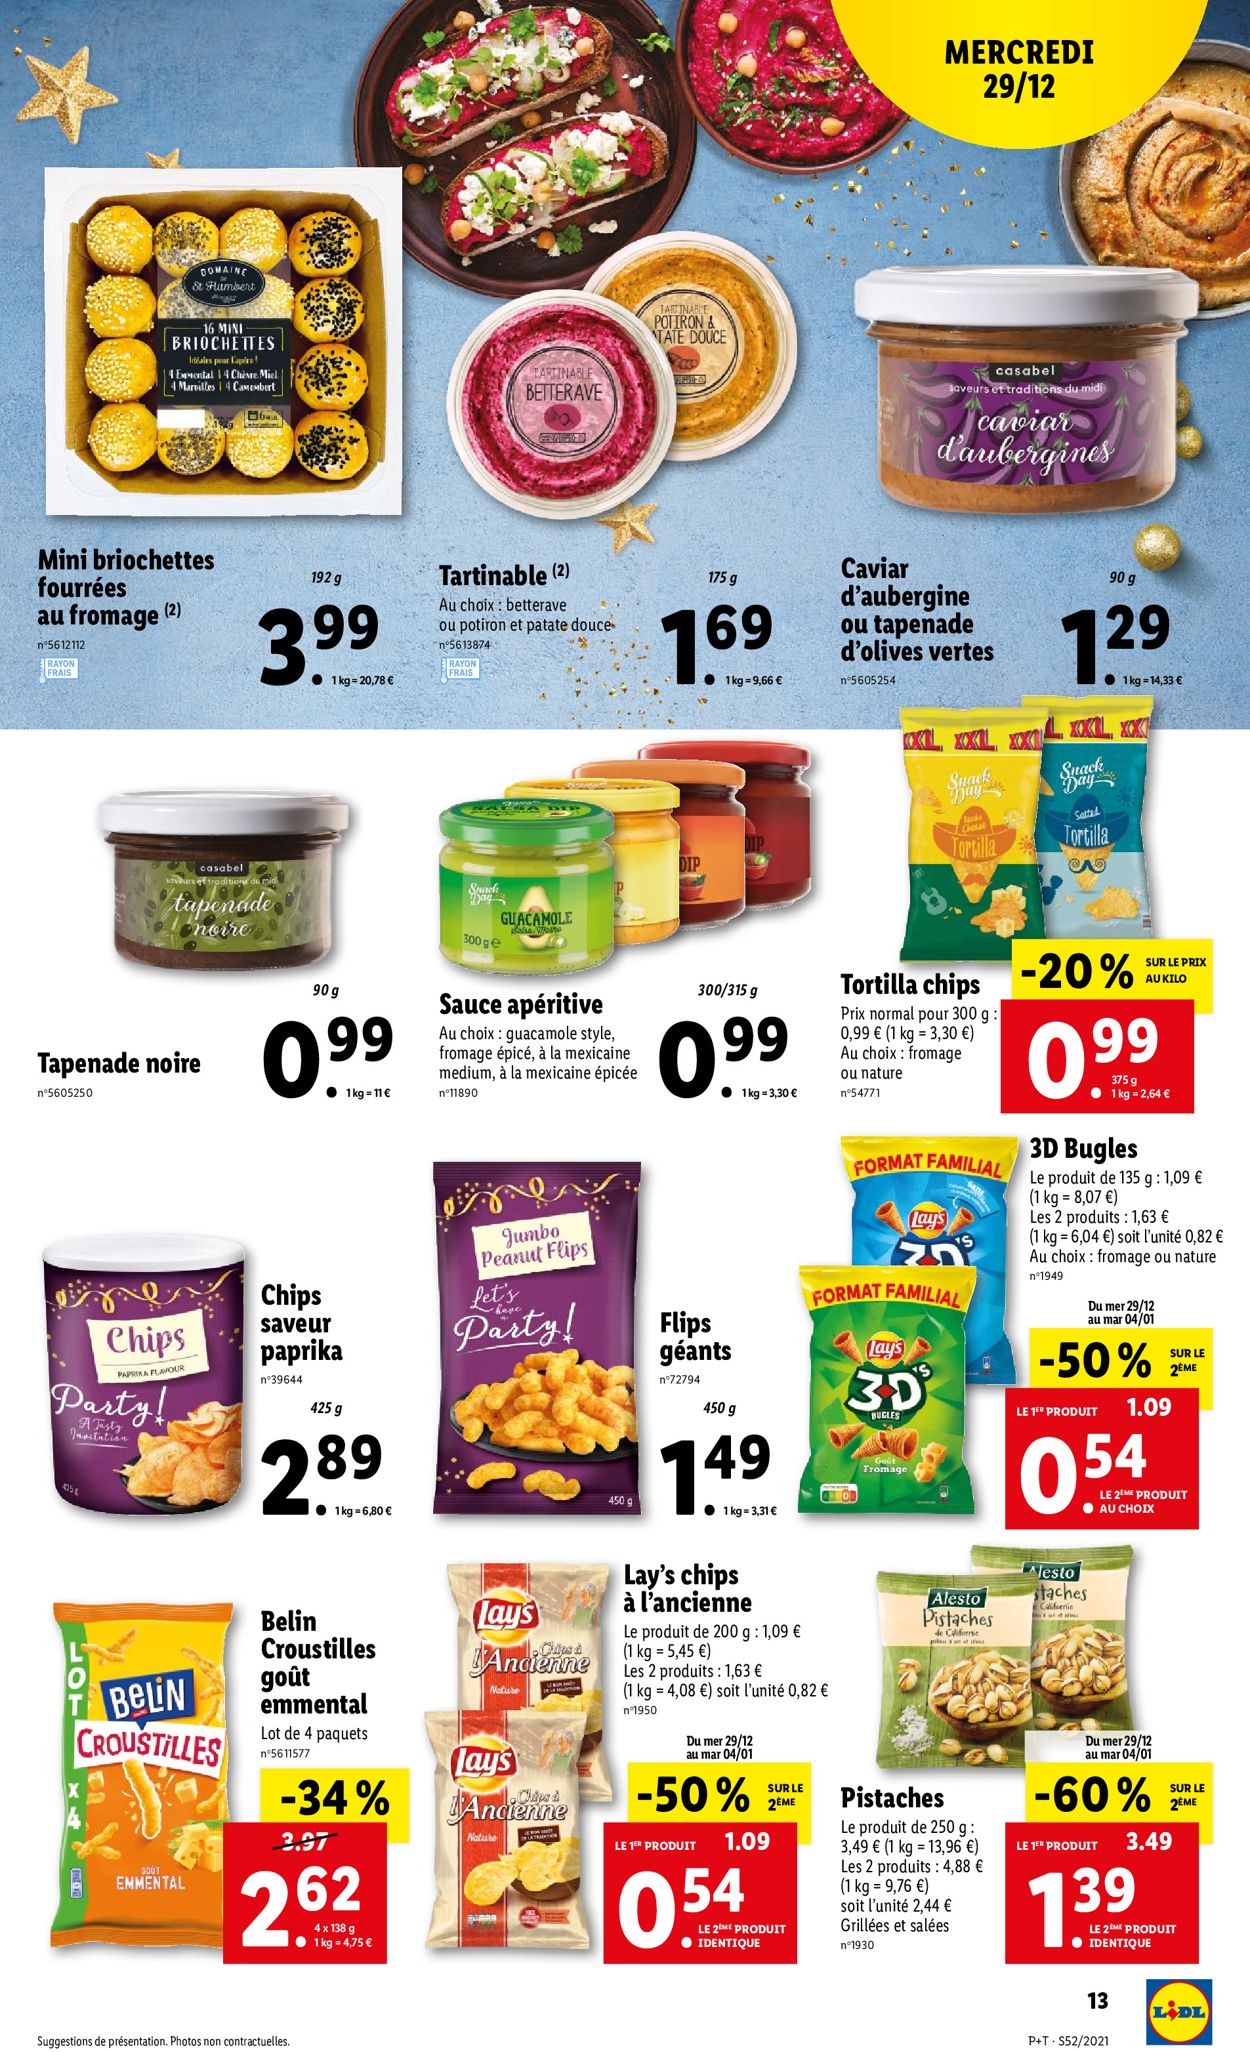 Lidl Catalogue - 29.12-04.01.2022 (Page 13)